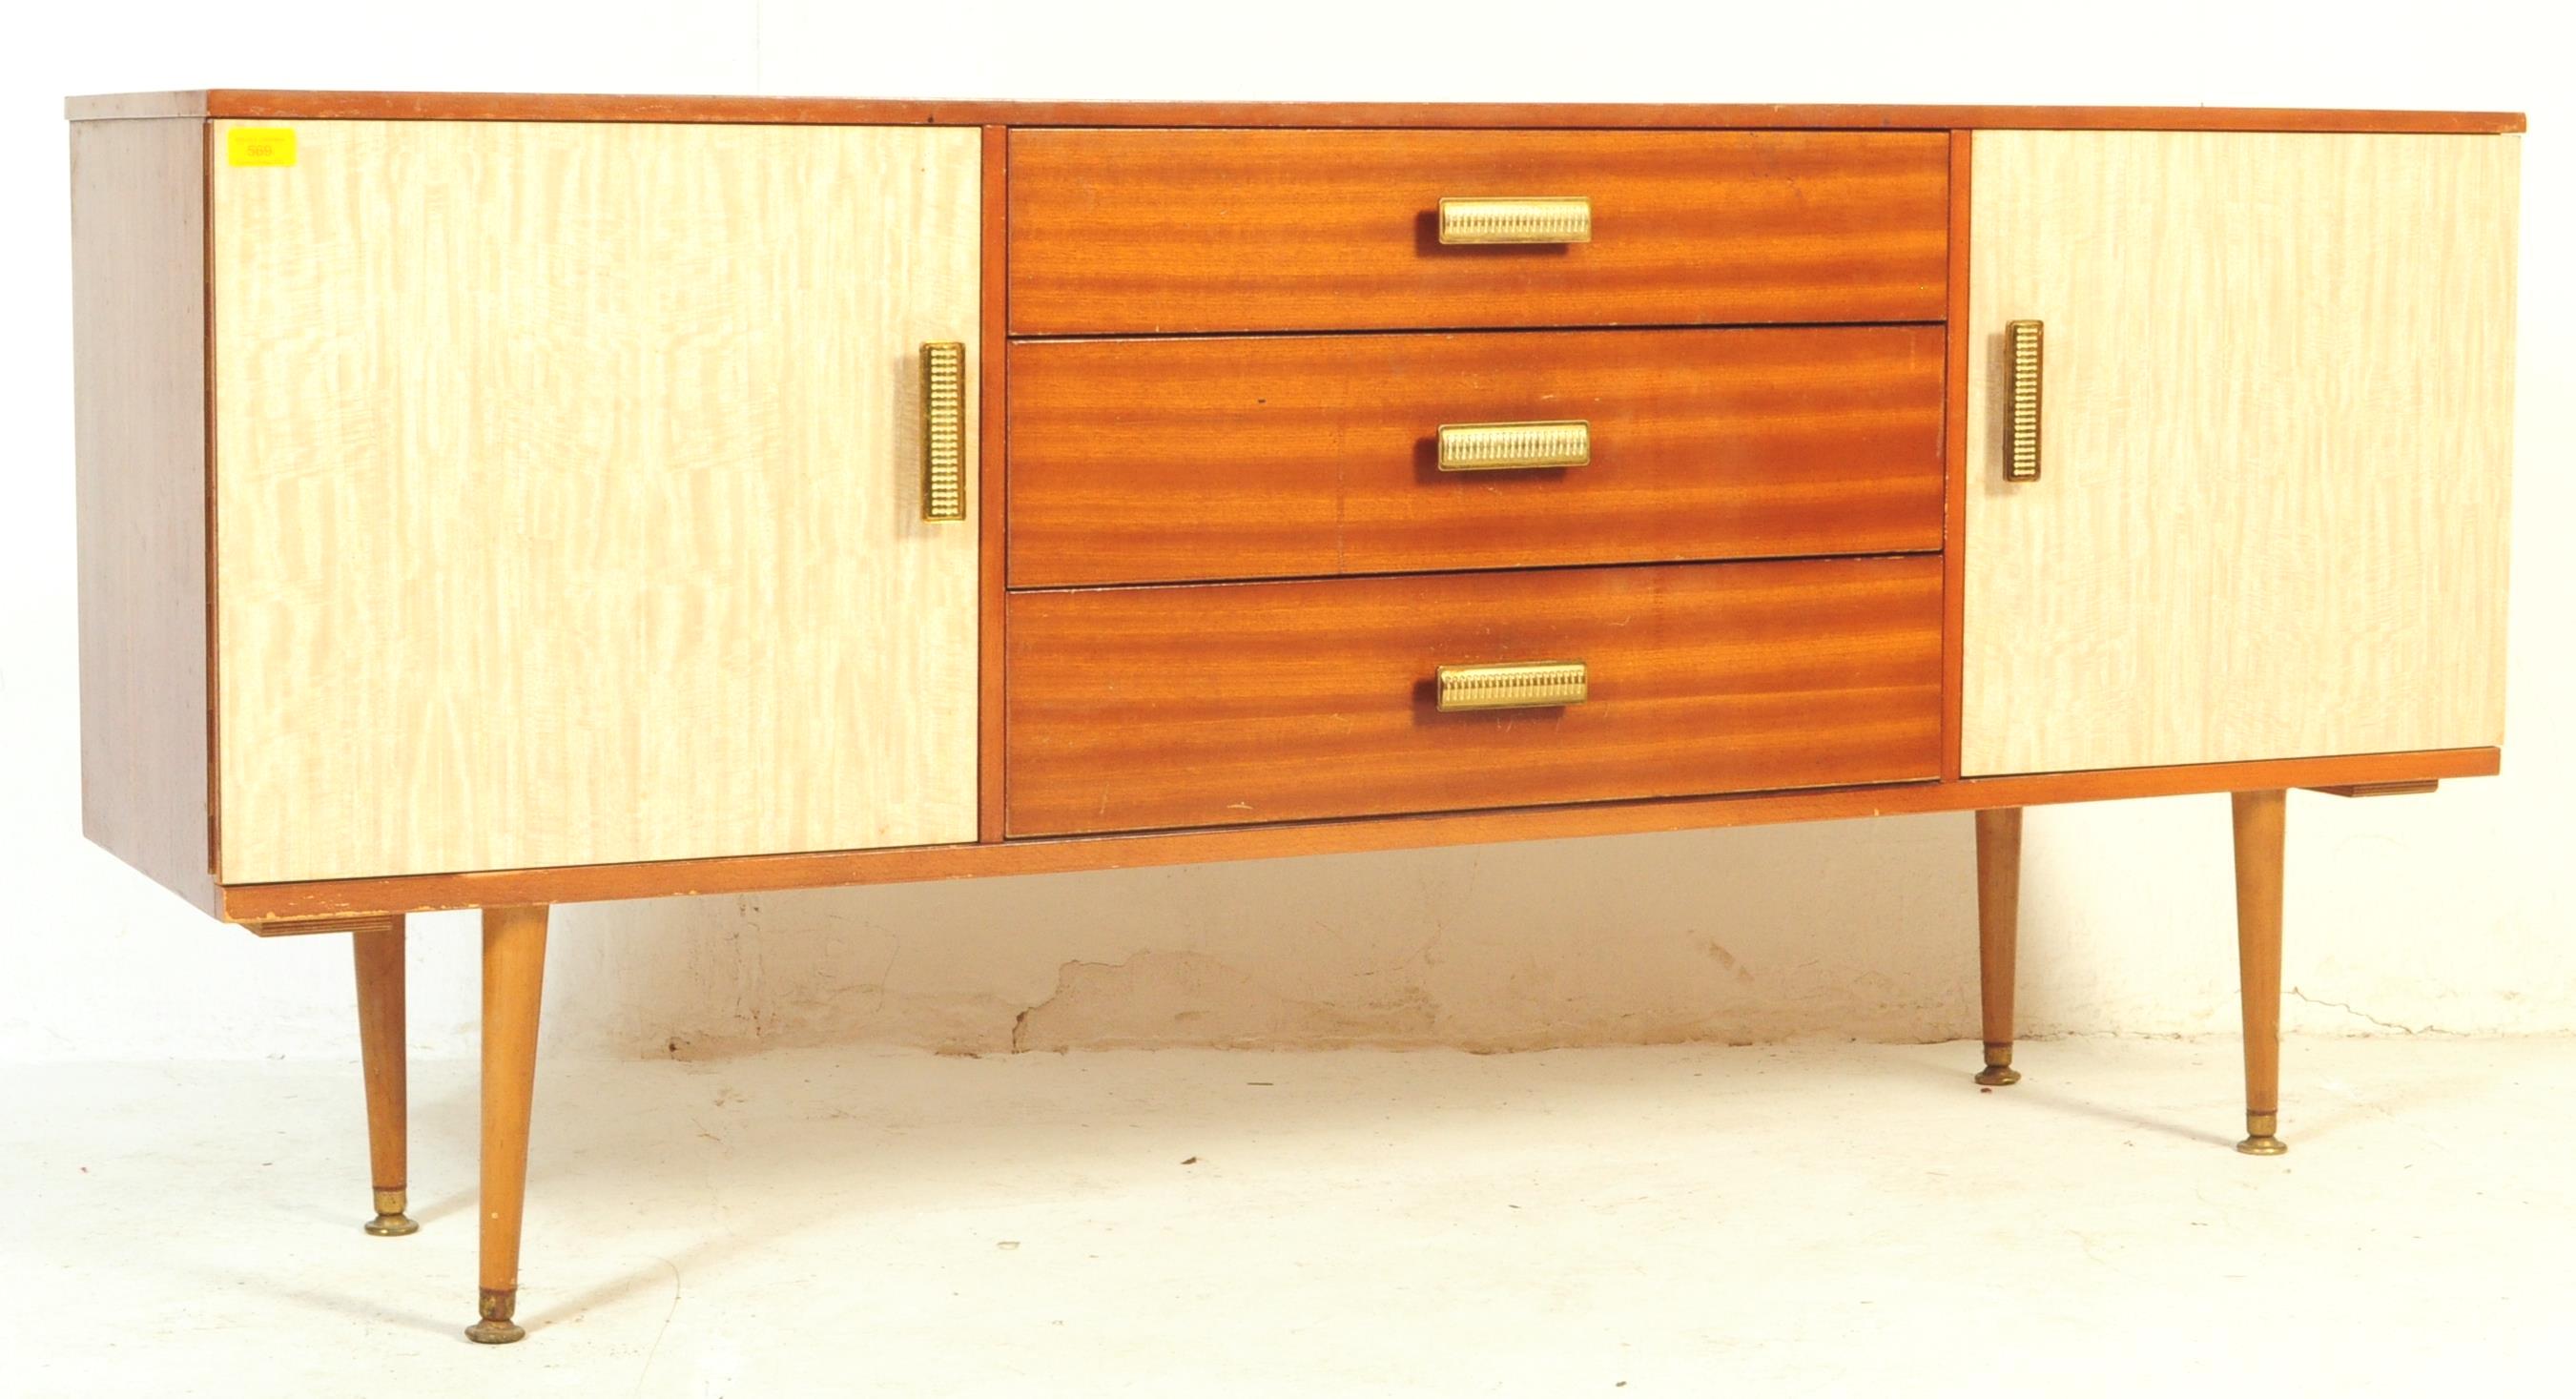 A RETRO VINTAGE 1970 WOODEN SIDEBOARD WITH FORMICA COVERED DOORS